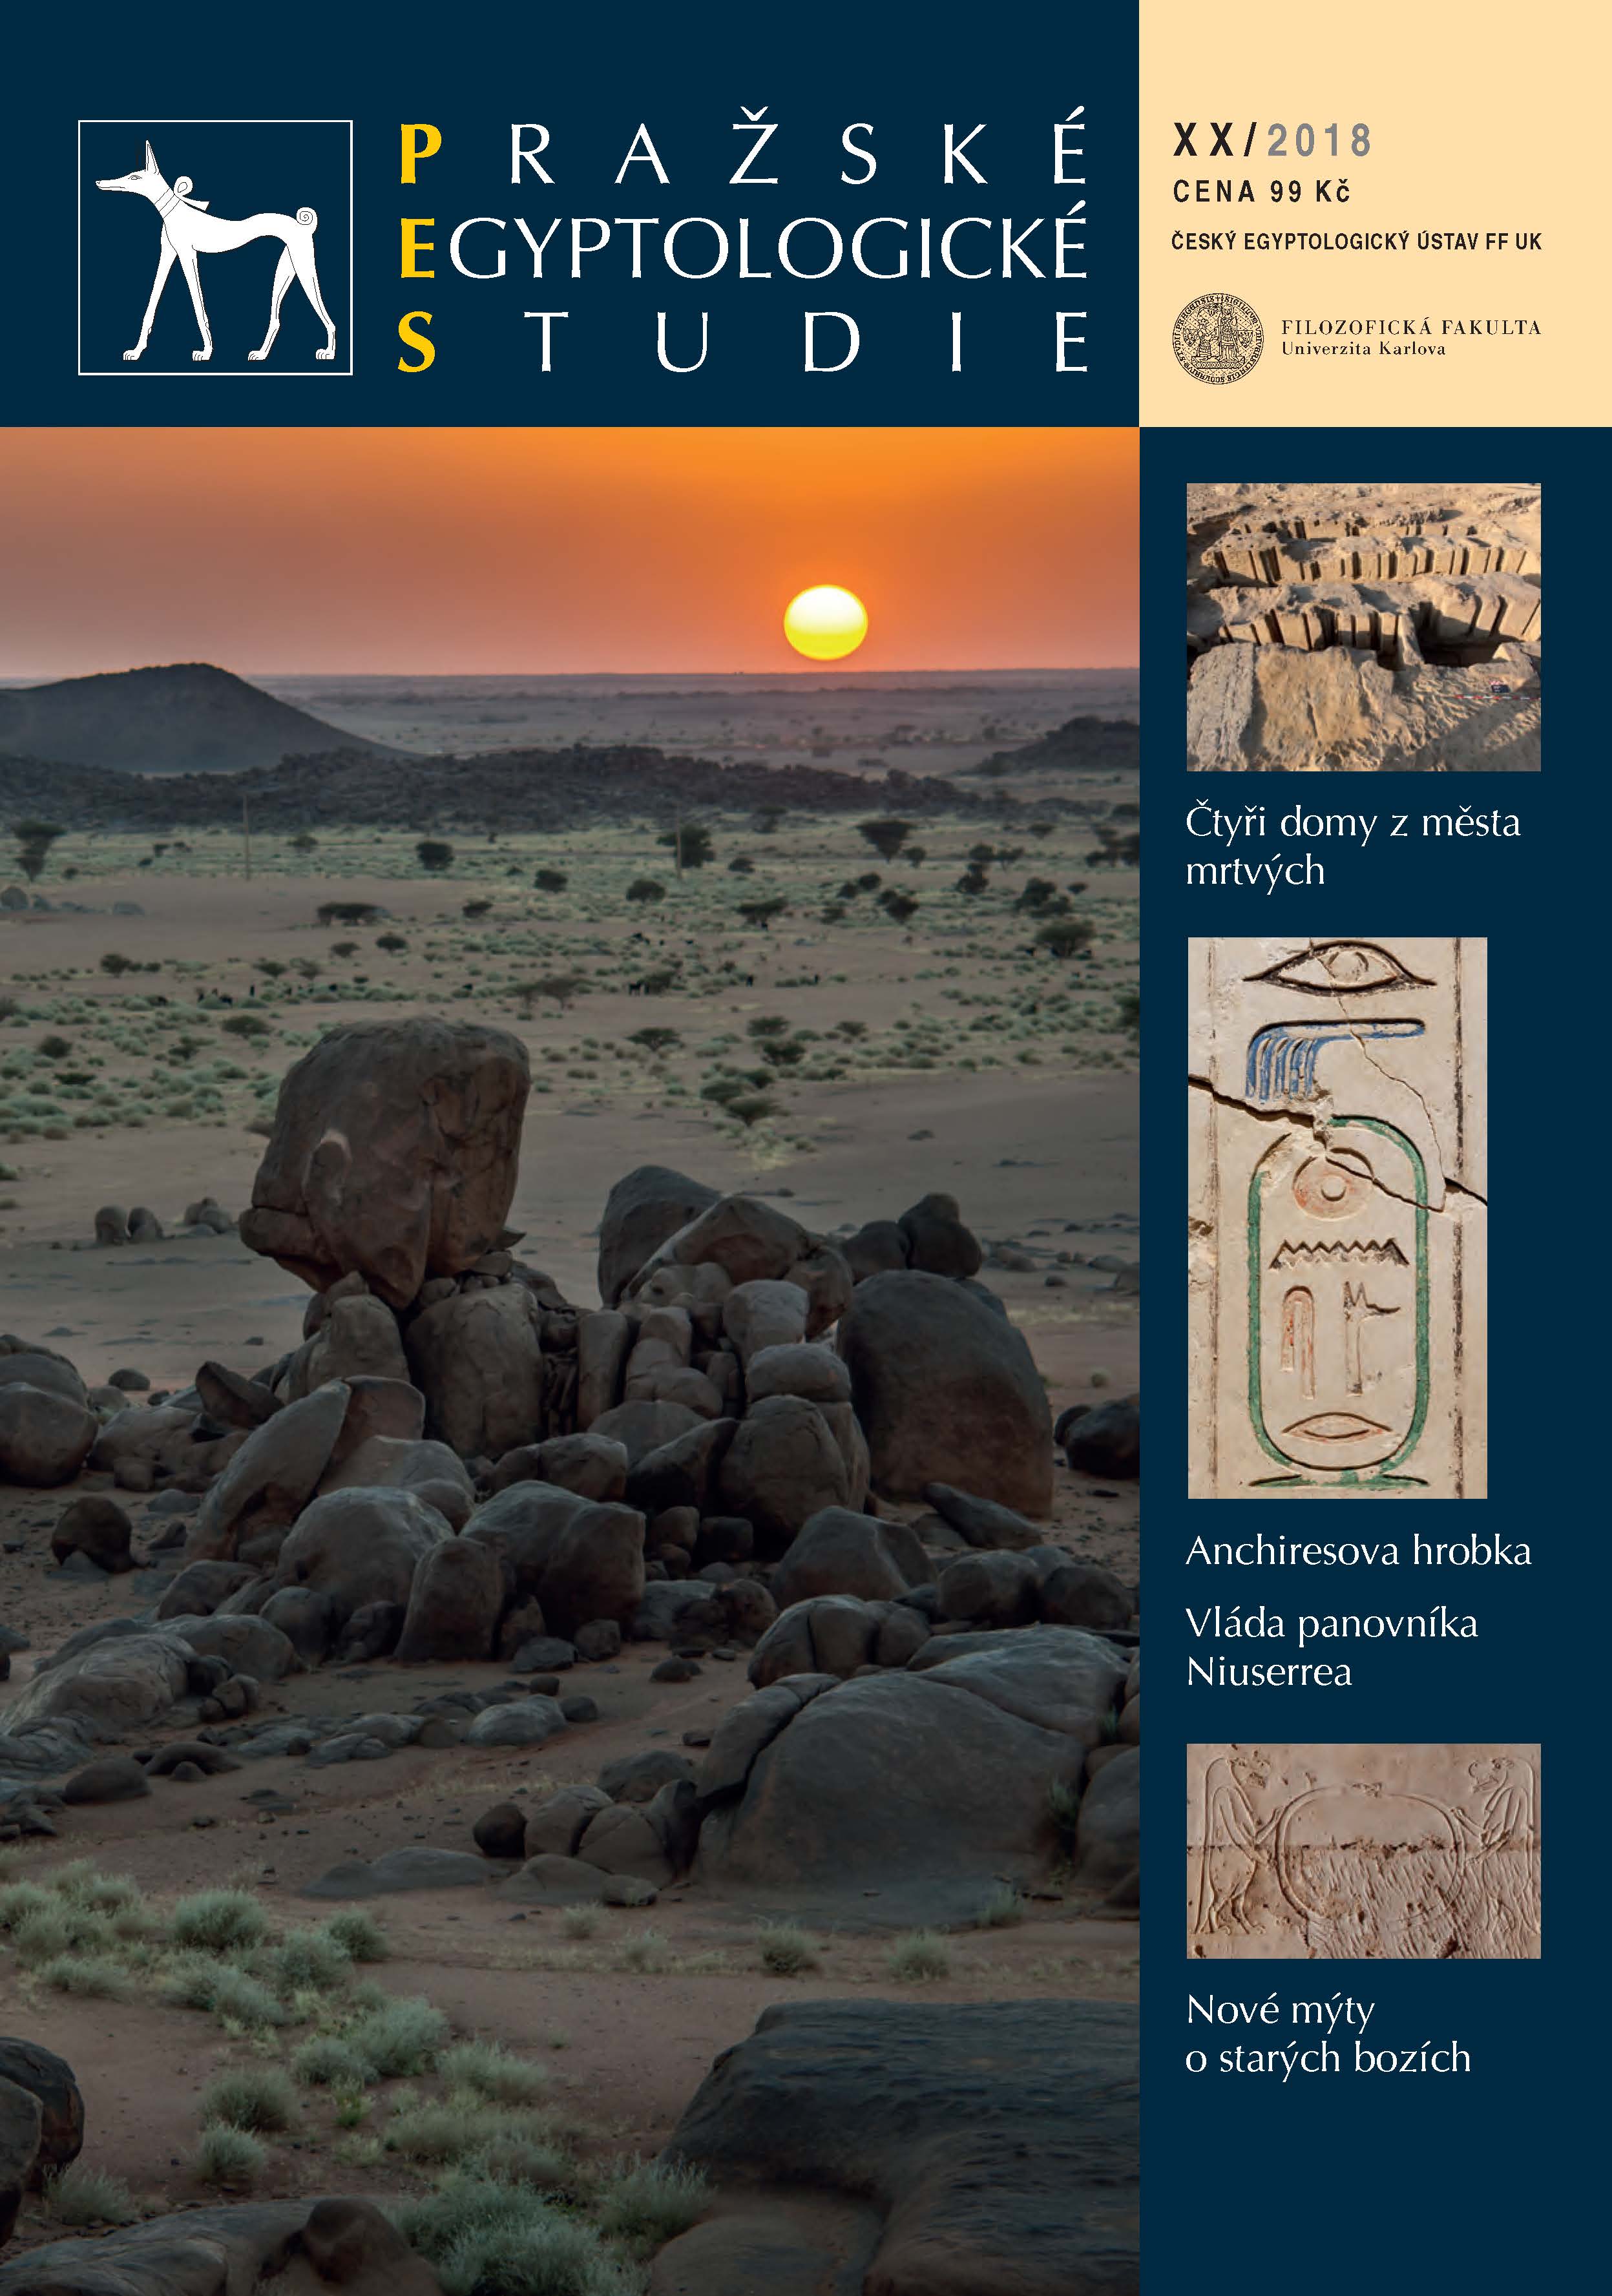 Another shaft tomb at Abusir – more questions, less answers (Spring archaeological season of 2017 in the group of the shaft tombs in western Abusir) Cover Image